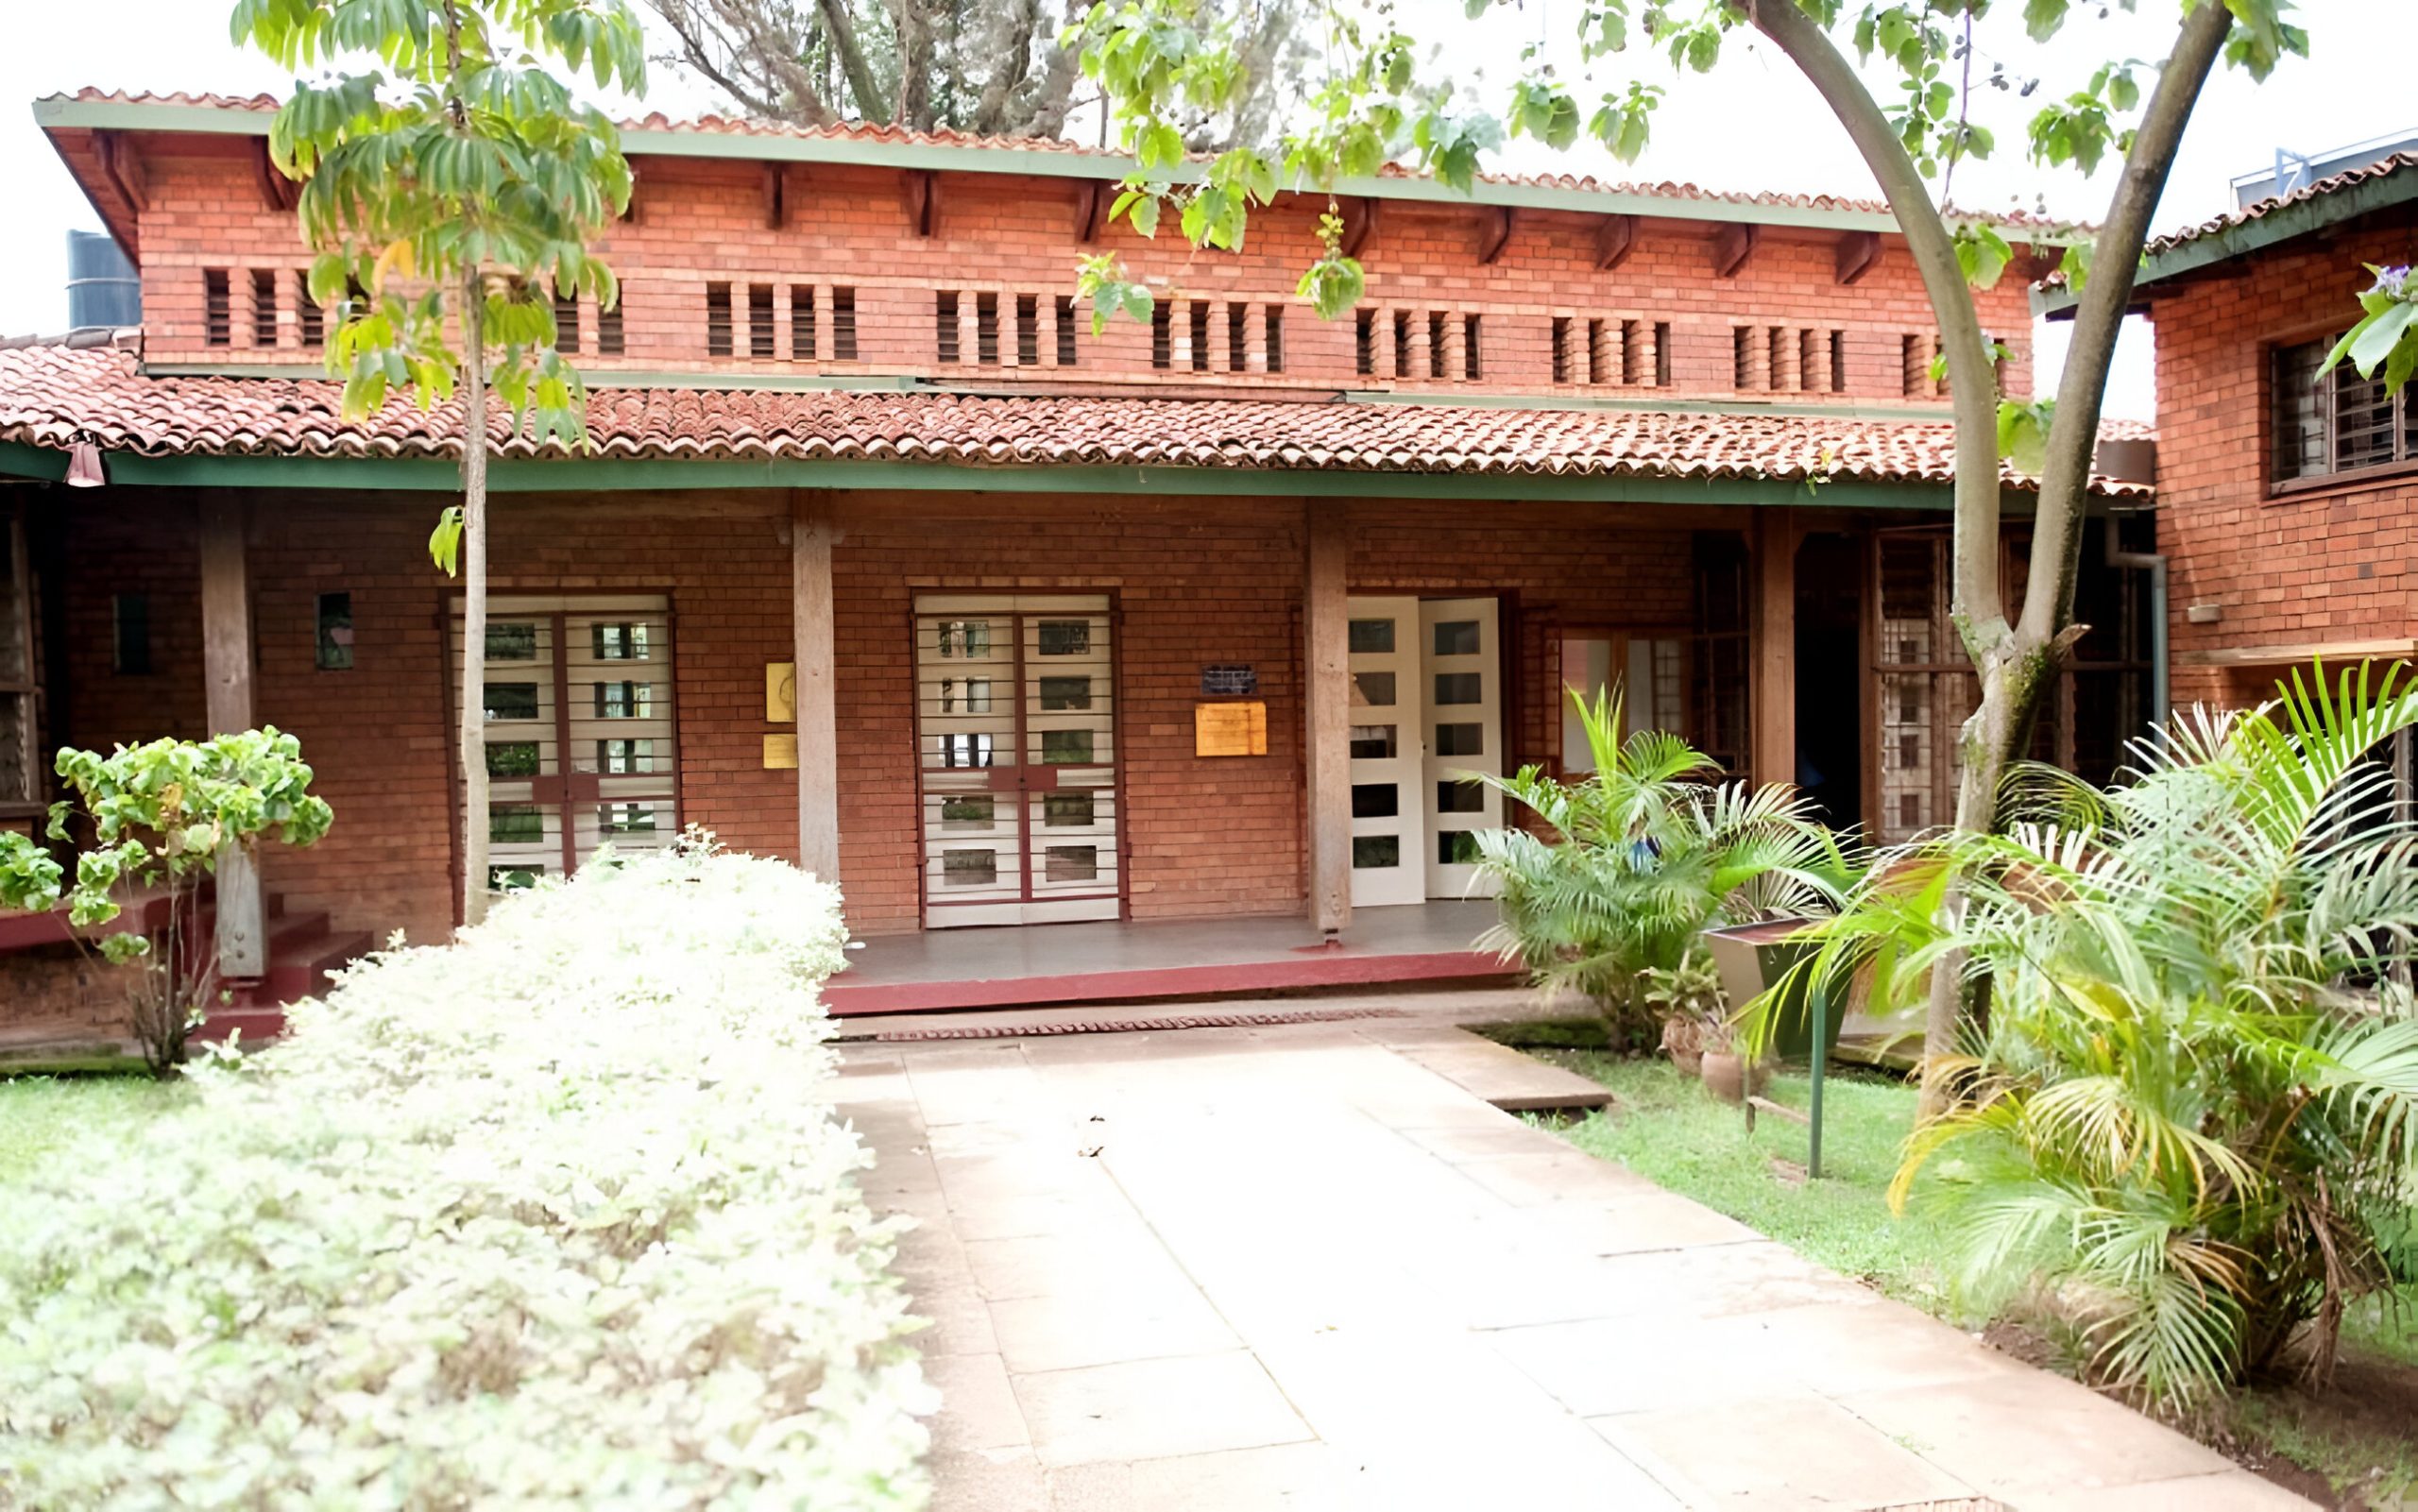 The Human Rights and Peace Centre (HURIPEC), School of Law, Makerere University. Kampala Uganda, East Africa.